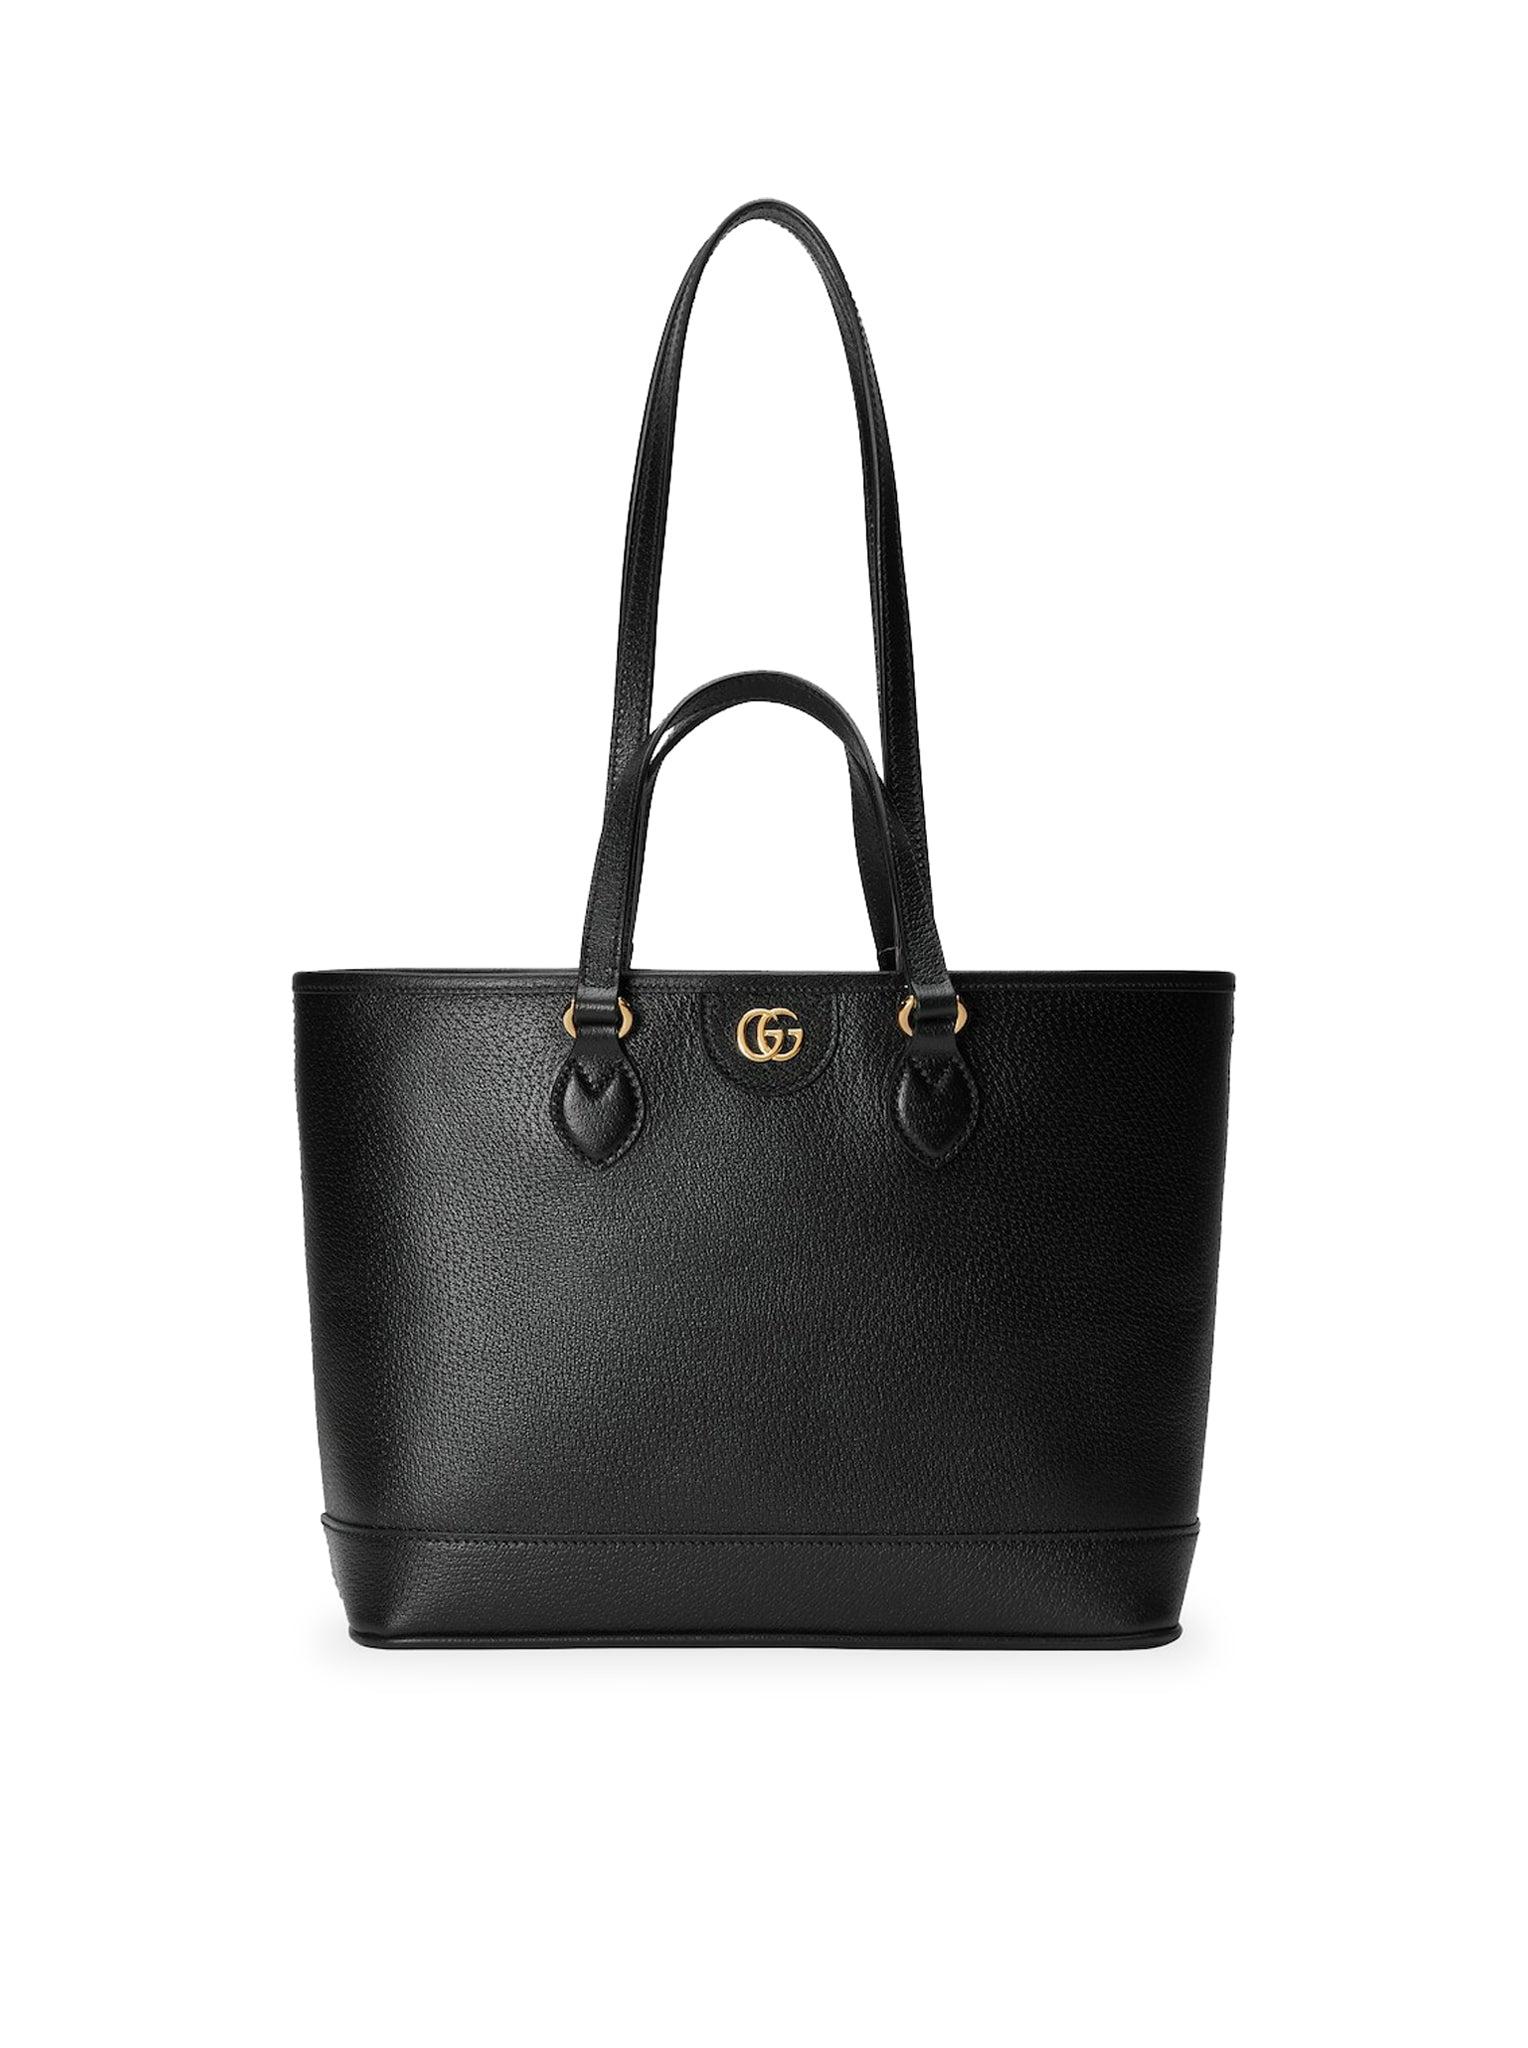 Gucci Ophidia Leather Tote Bag in Black | Lyst